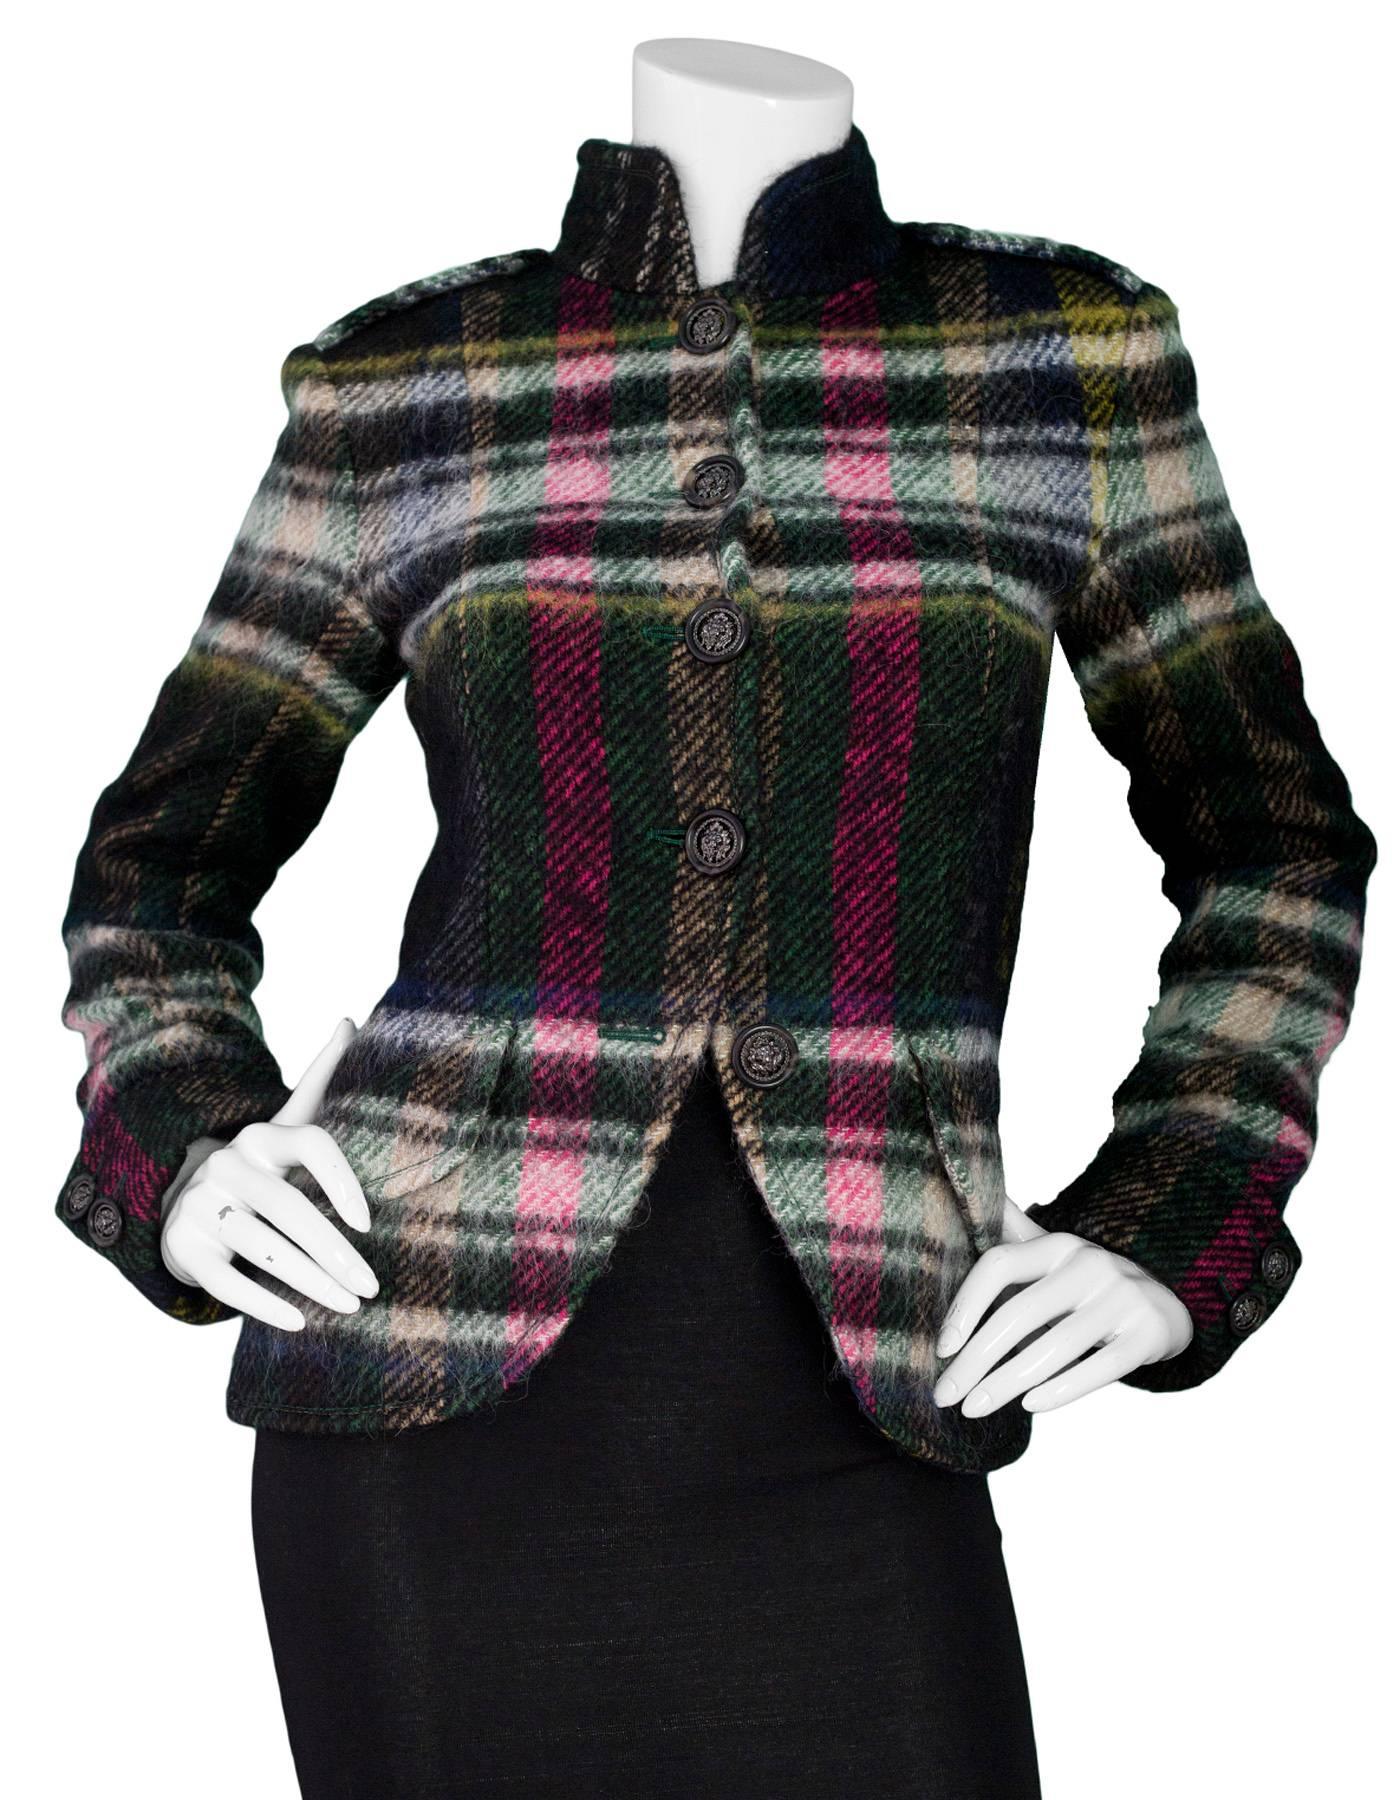 Chanel Multi-Color Plaid Wool-Blend Jacket Sz FR36

Features lion-head buttons

Made In: France
Color: Black, multi-color
Year Of Production: 2013
Composition: 64% Wool, 12% Alpaca, 12% nylon, 12% mohair
Lining: Black, 100% silk
Closure/Opening: